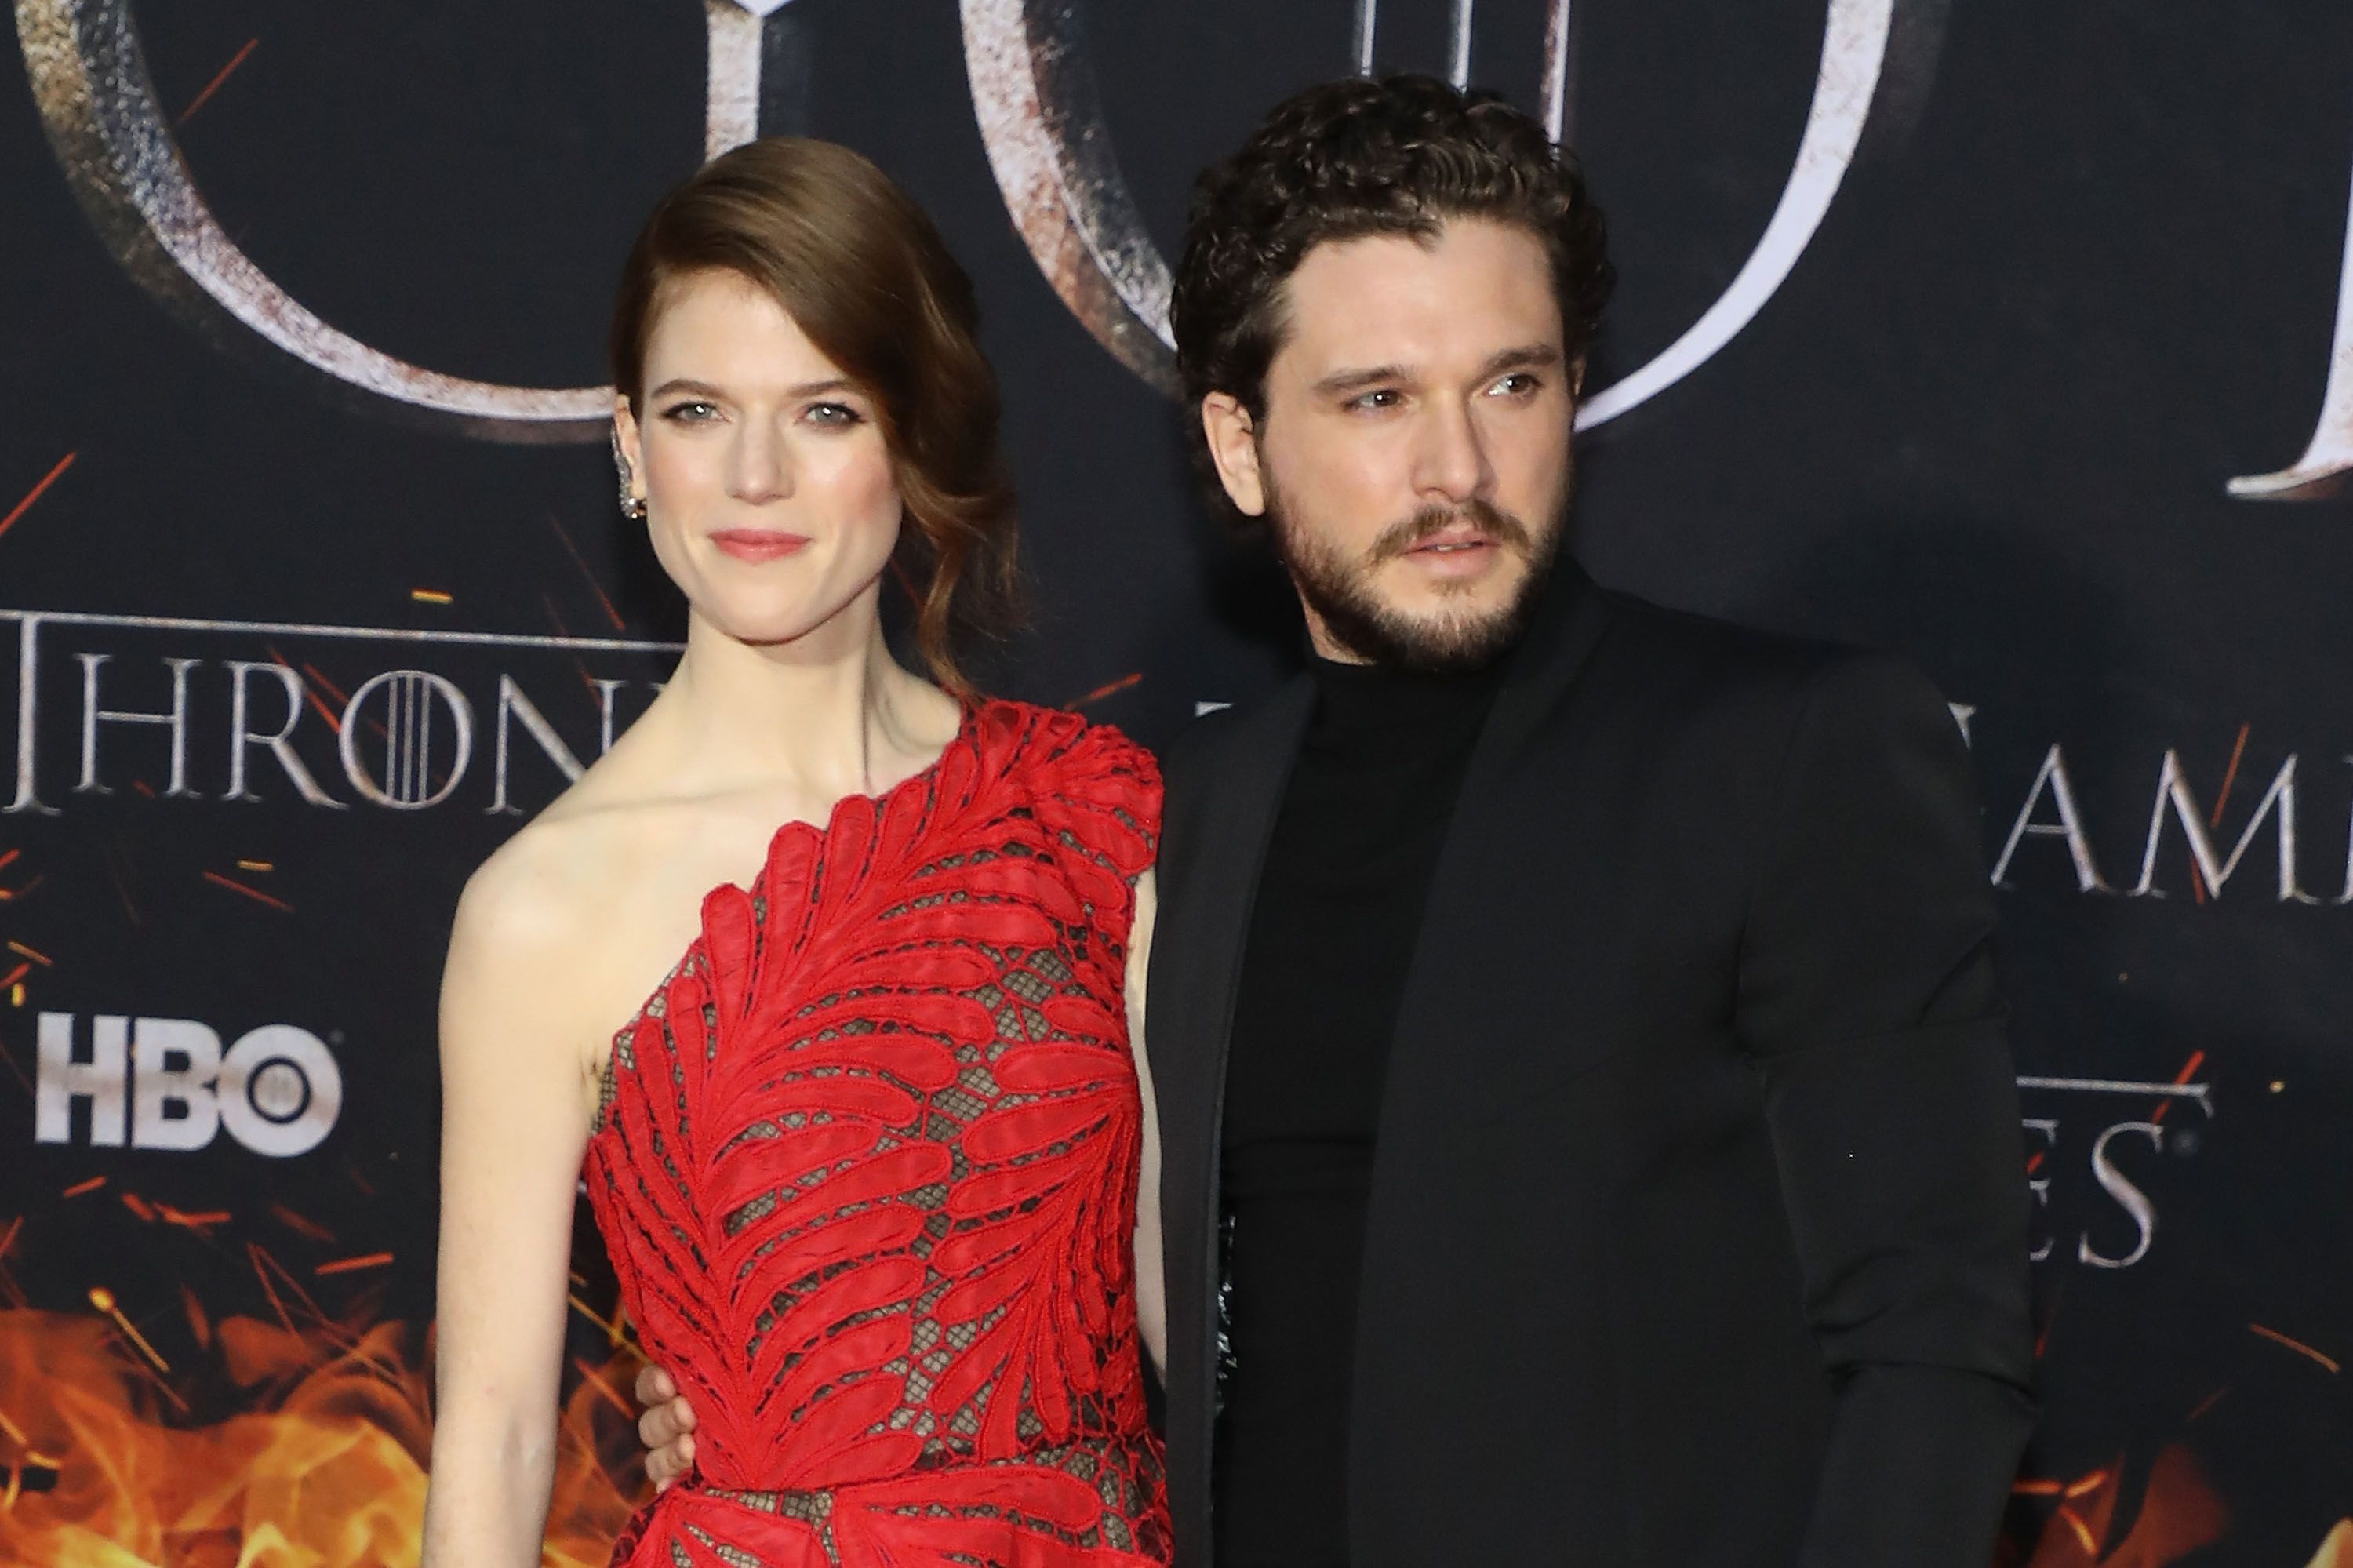 Rose Leslie and Kit Harington at the Season 8 premiere of "Game of Thrones" at Radio City Music Hall on April 3, 2019 | Photo: Getty Images